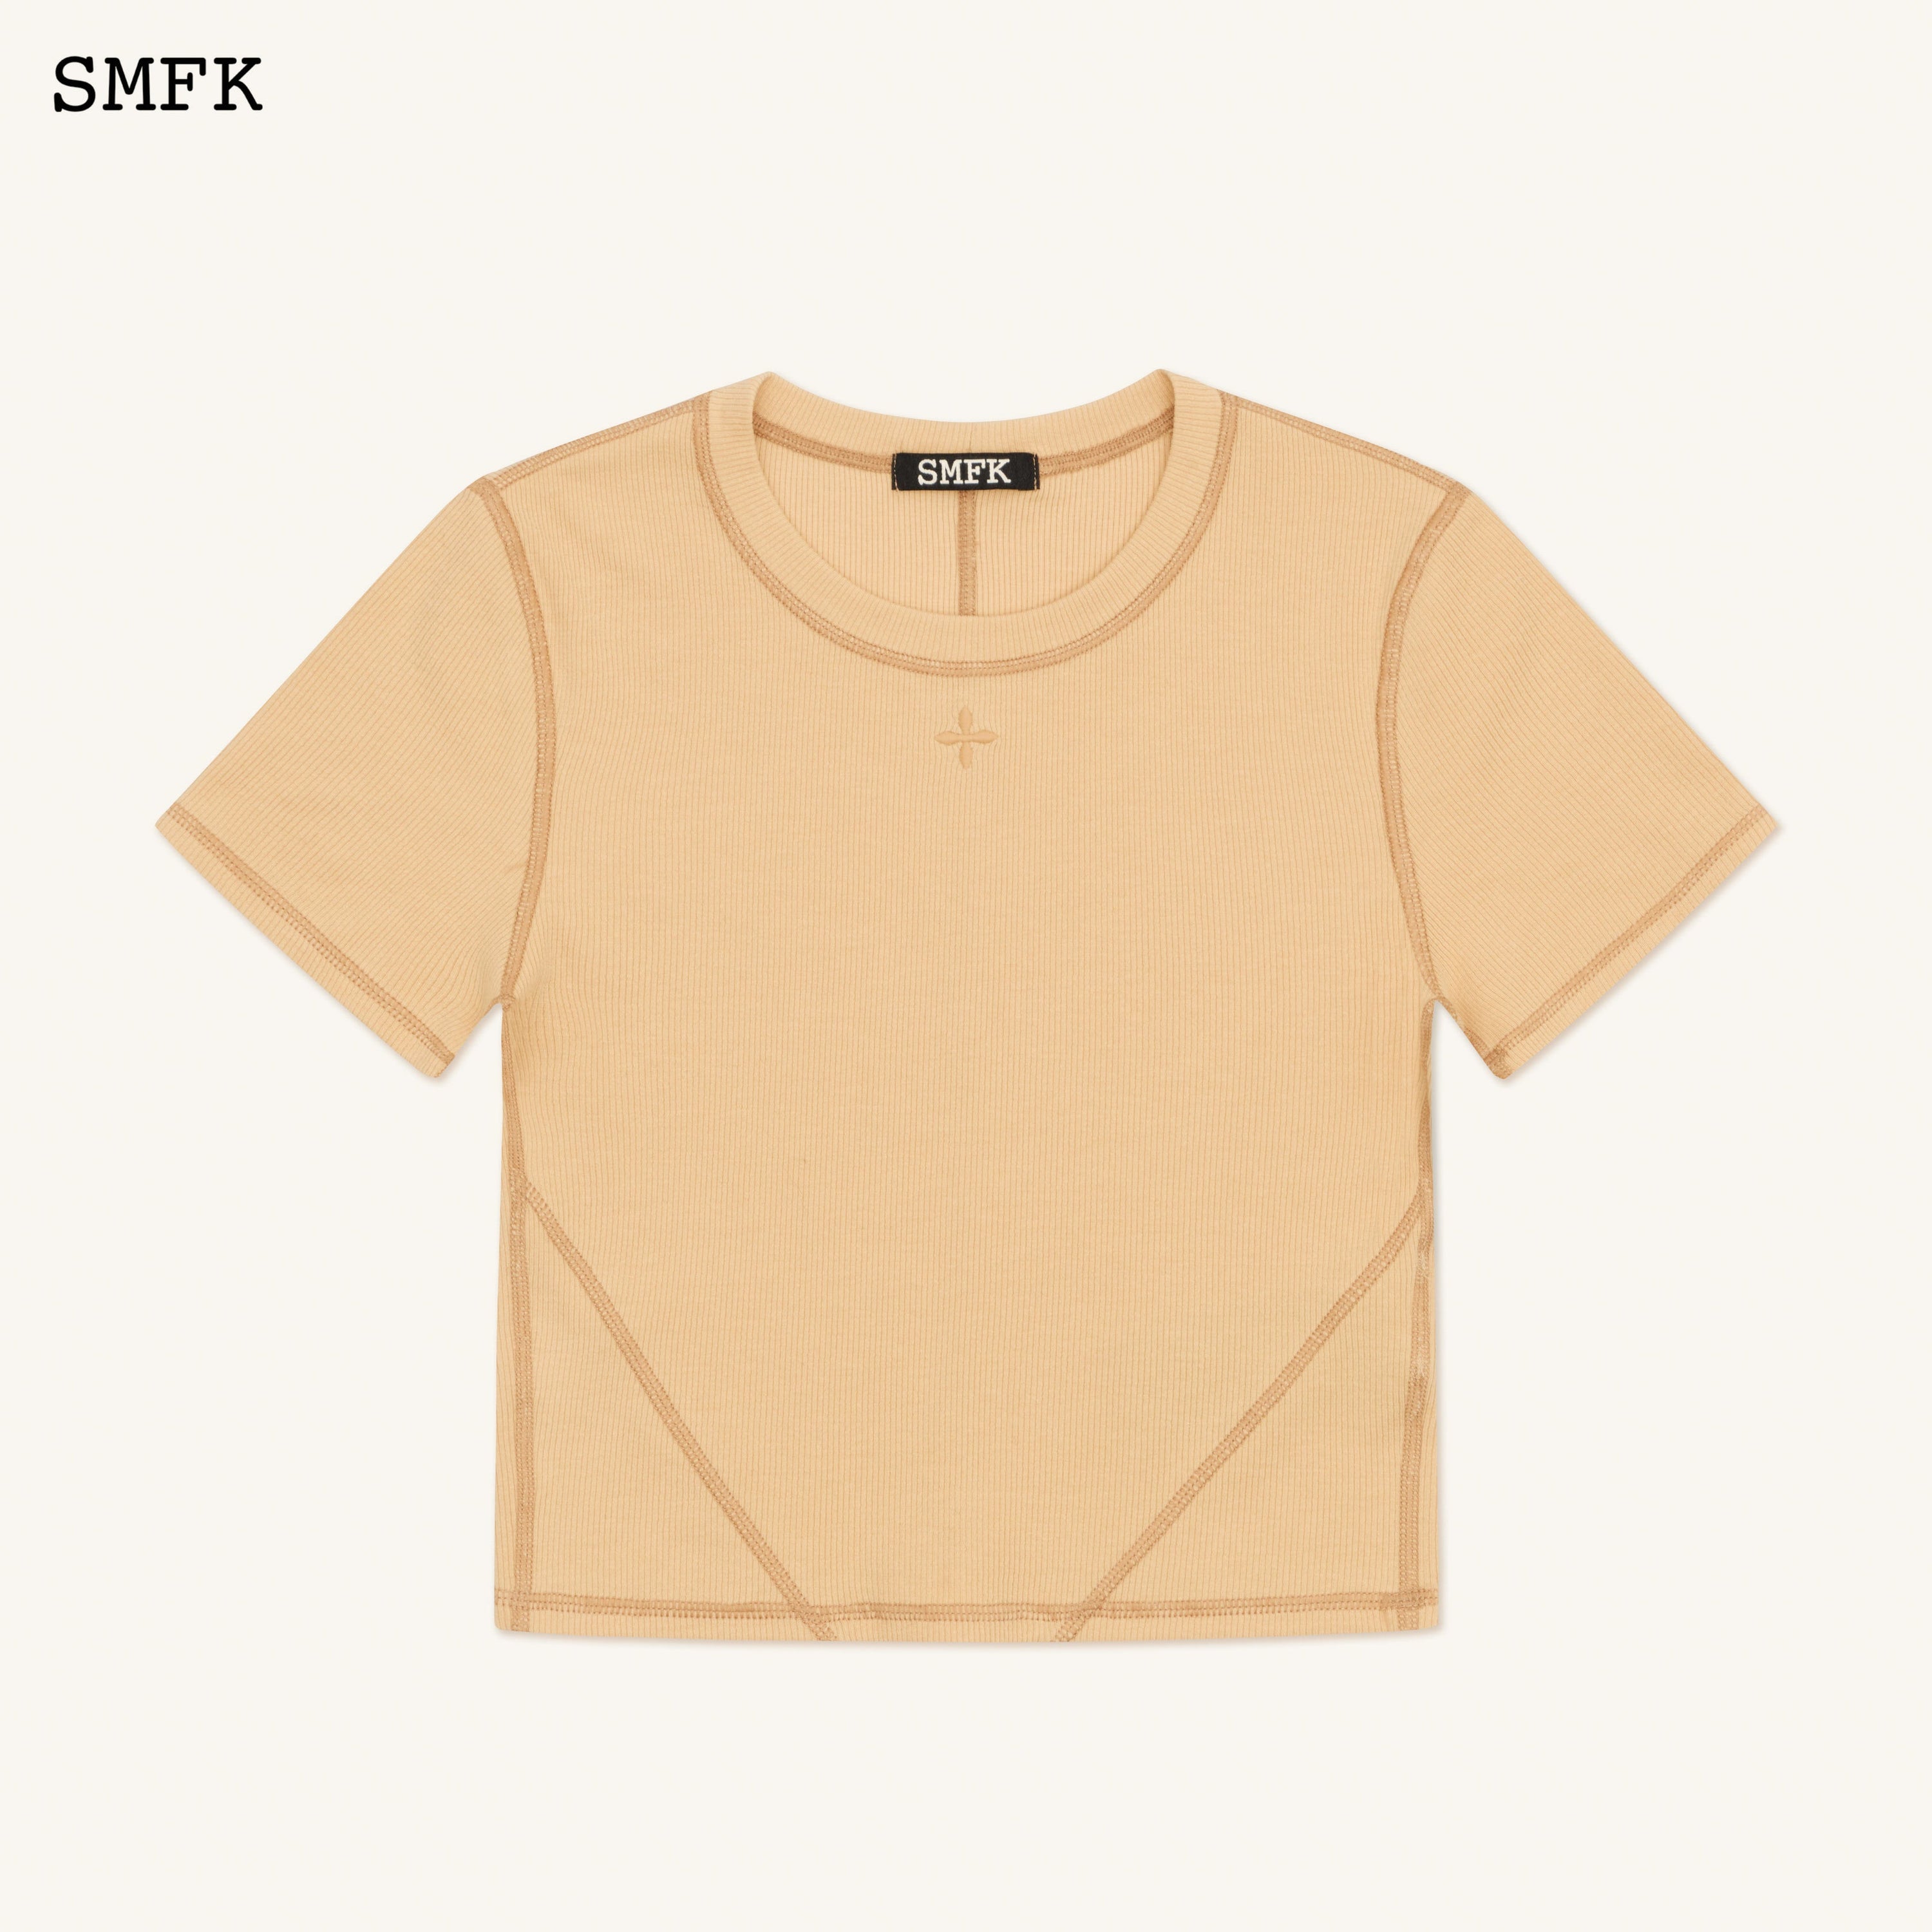 Compass Rush Slim-Fit Tee In Sand - SMFK Official